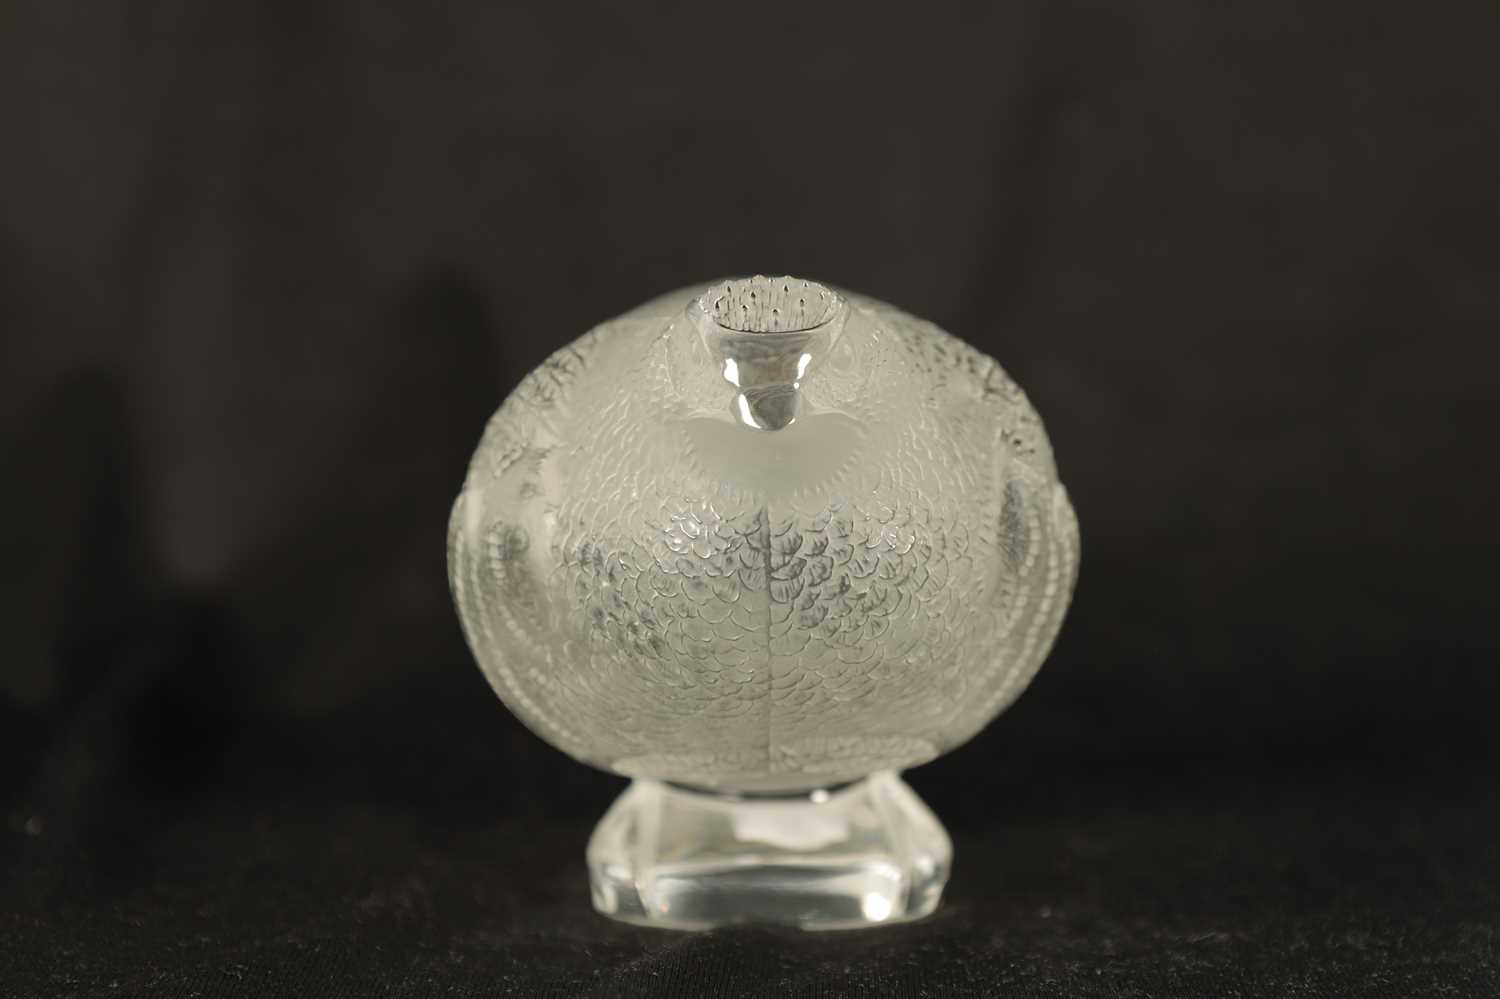 A LALIQUE FRANCE FROSTED GLASS BIRD SCULPTURE - Image 6 of 10